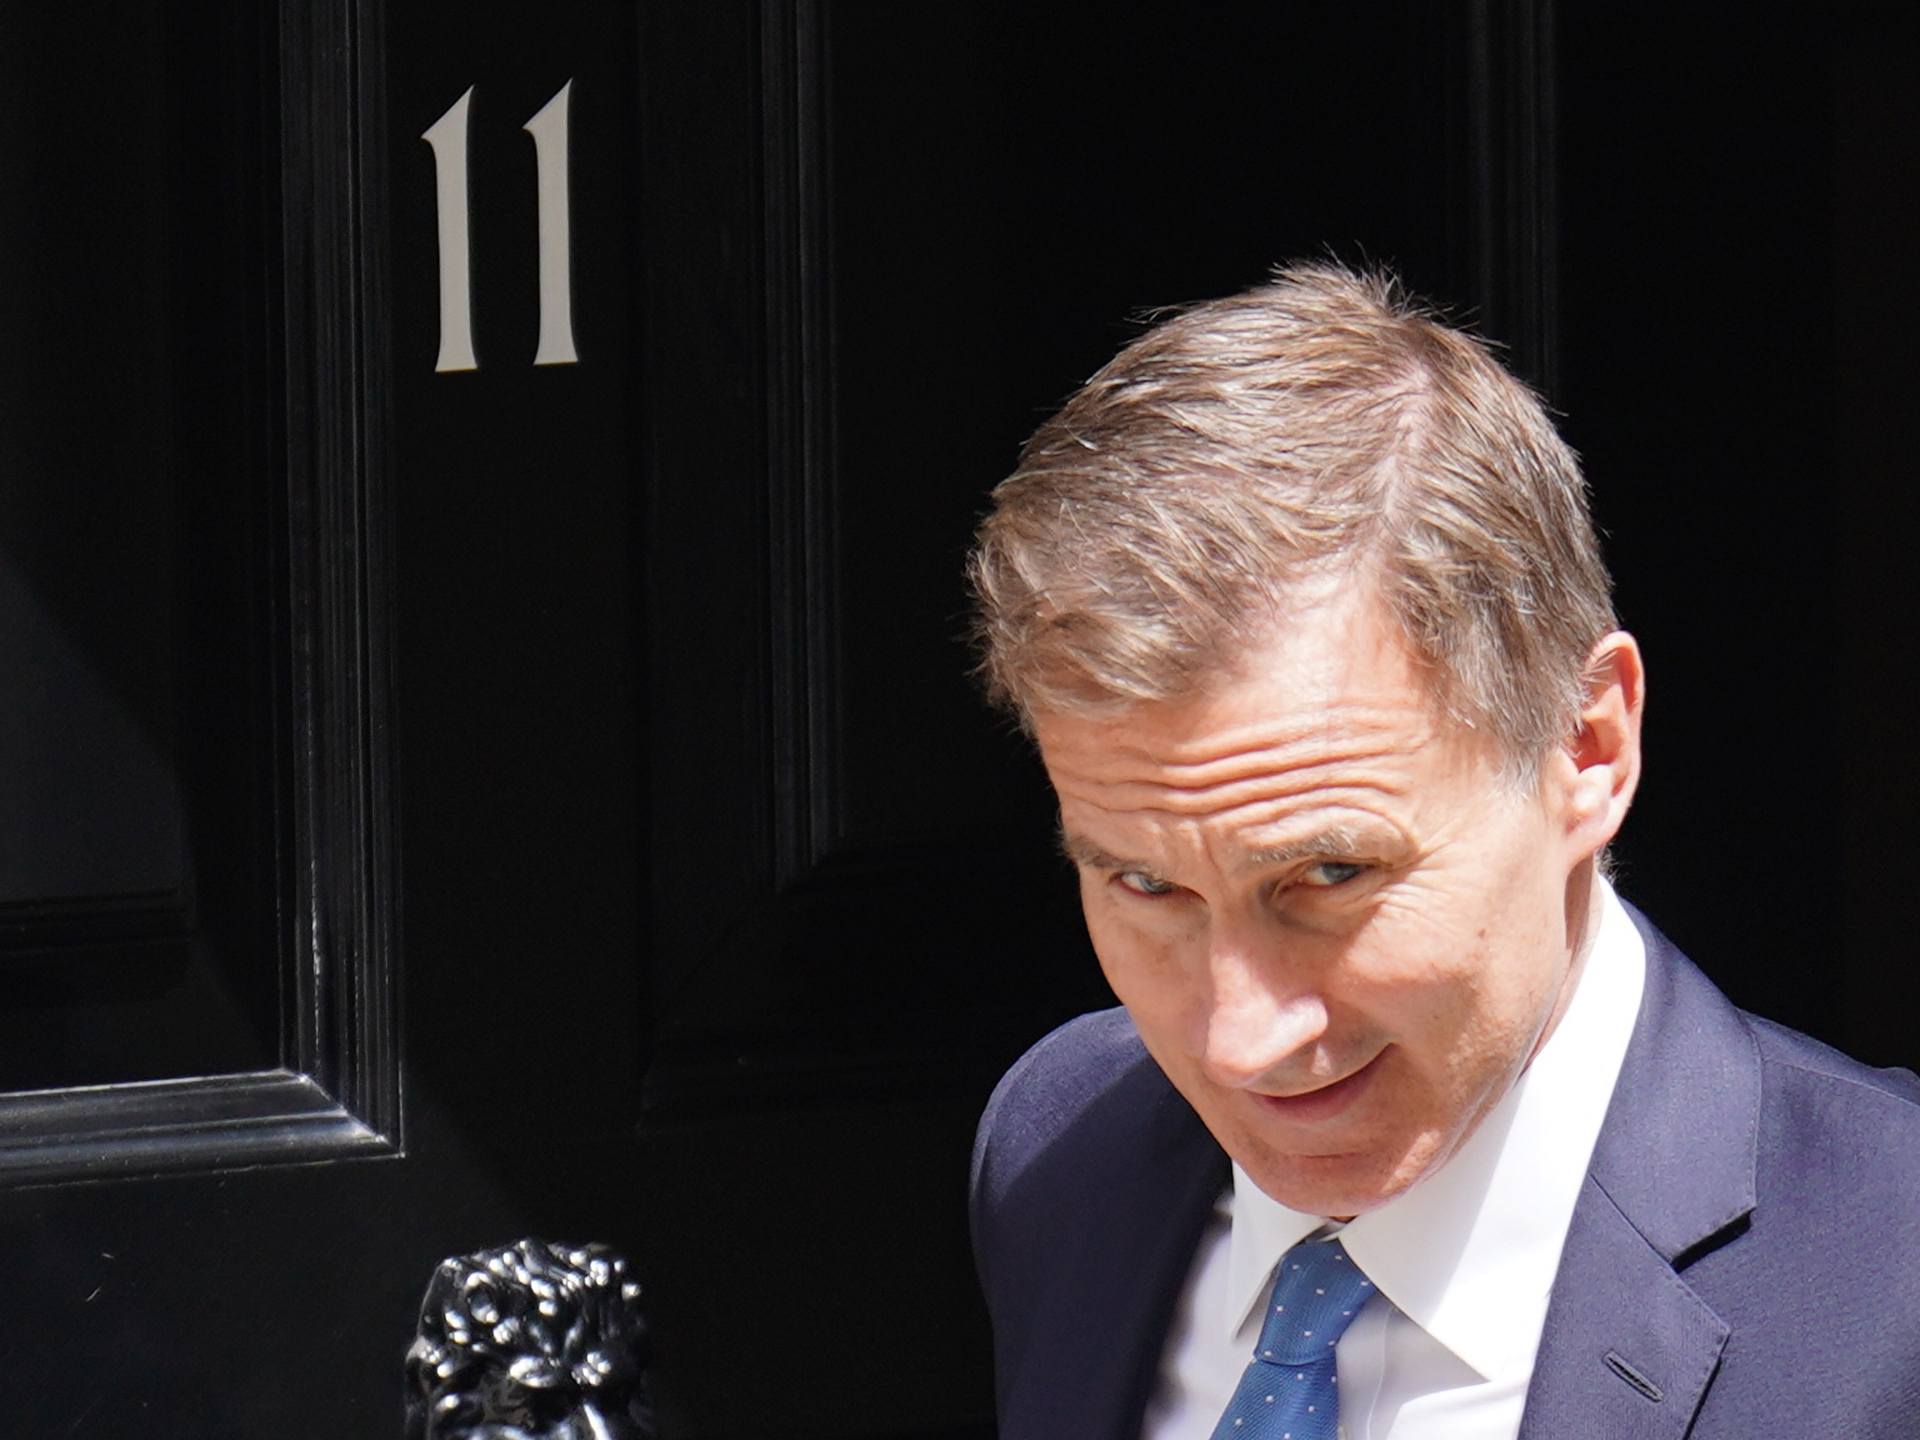 Chancellor Jeremy Hunt said earlier this year that he hopes to prove the IMF wrong.